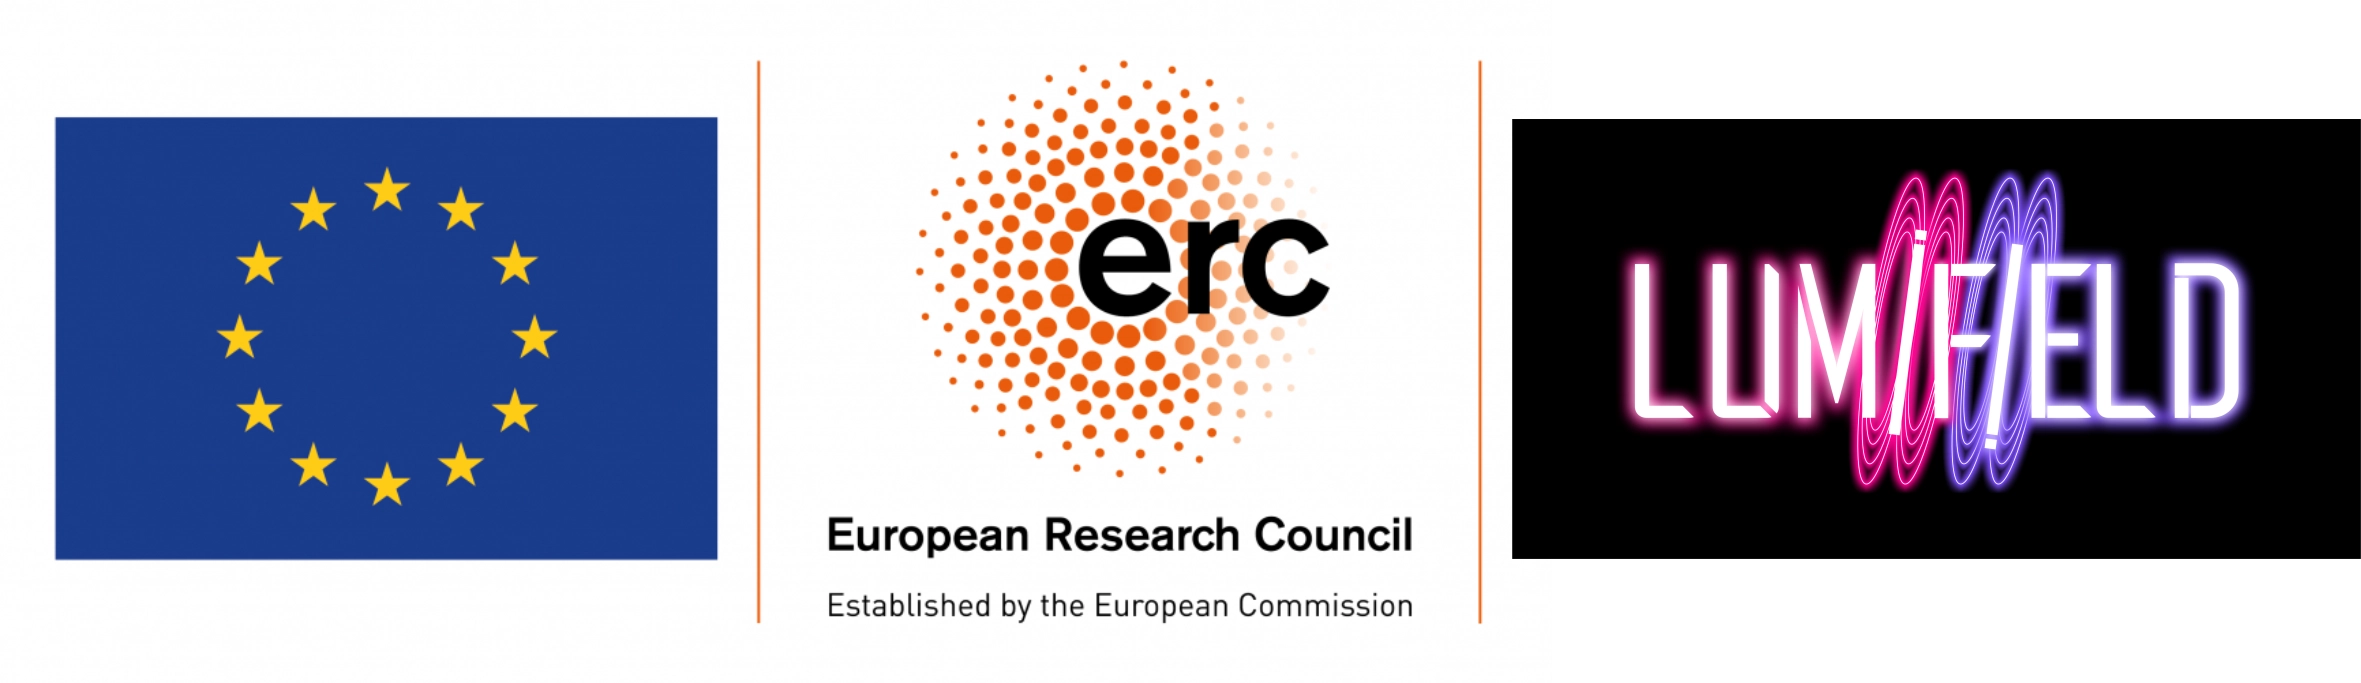 The series of signs depicting the flag of the European Union, a circle composed of twelve golden five-pointed stars on an azure background, the European Research Council logo, an orange sphere made of small circles, and the lumifield project logo, the lumiefield inscription stylized as neon lights